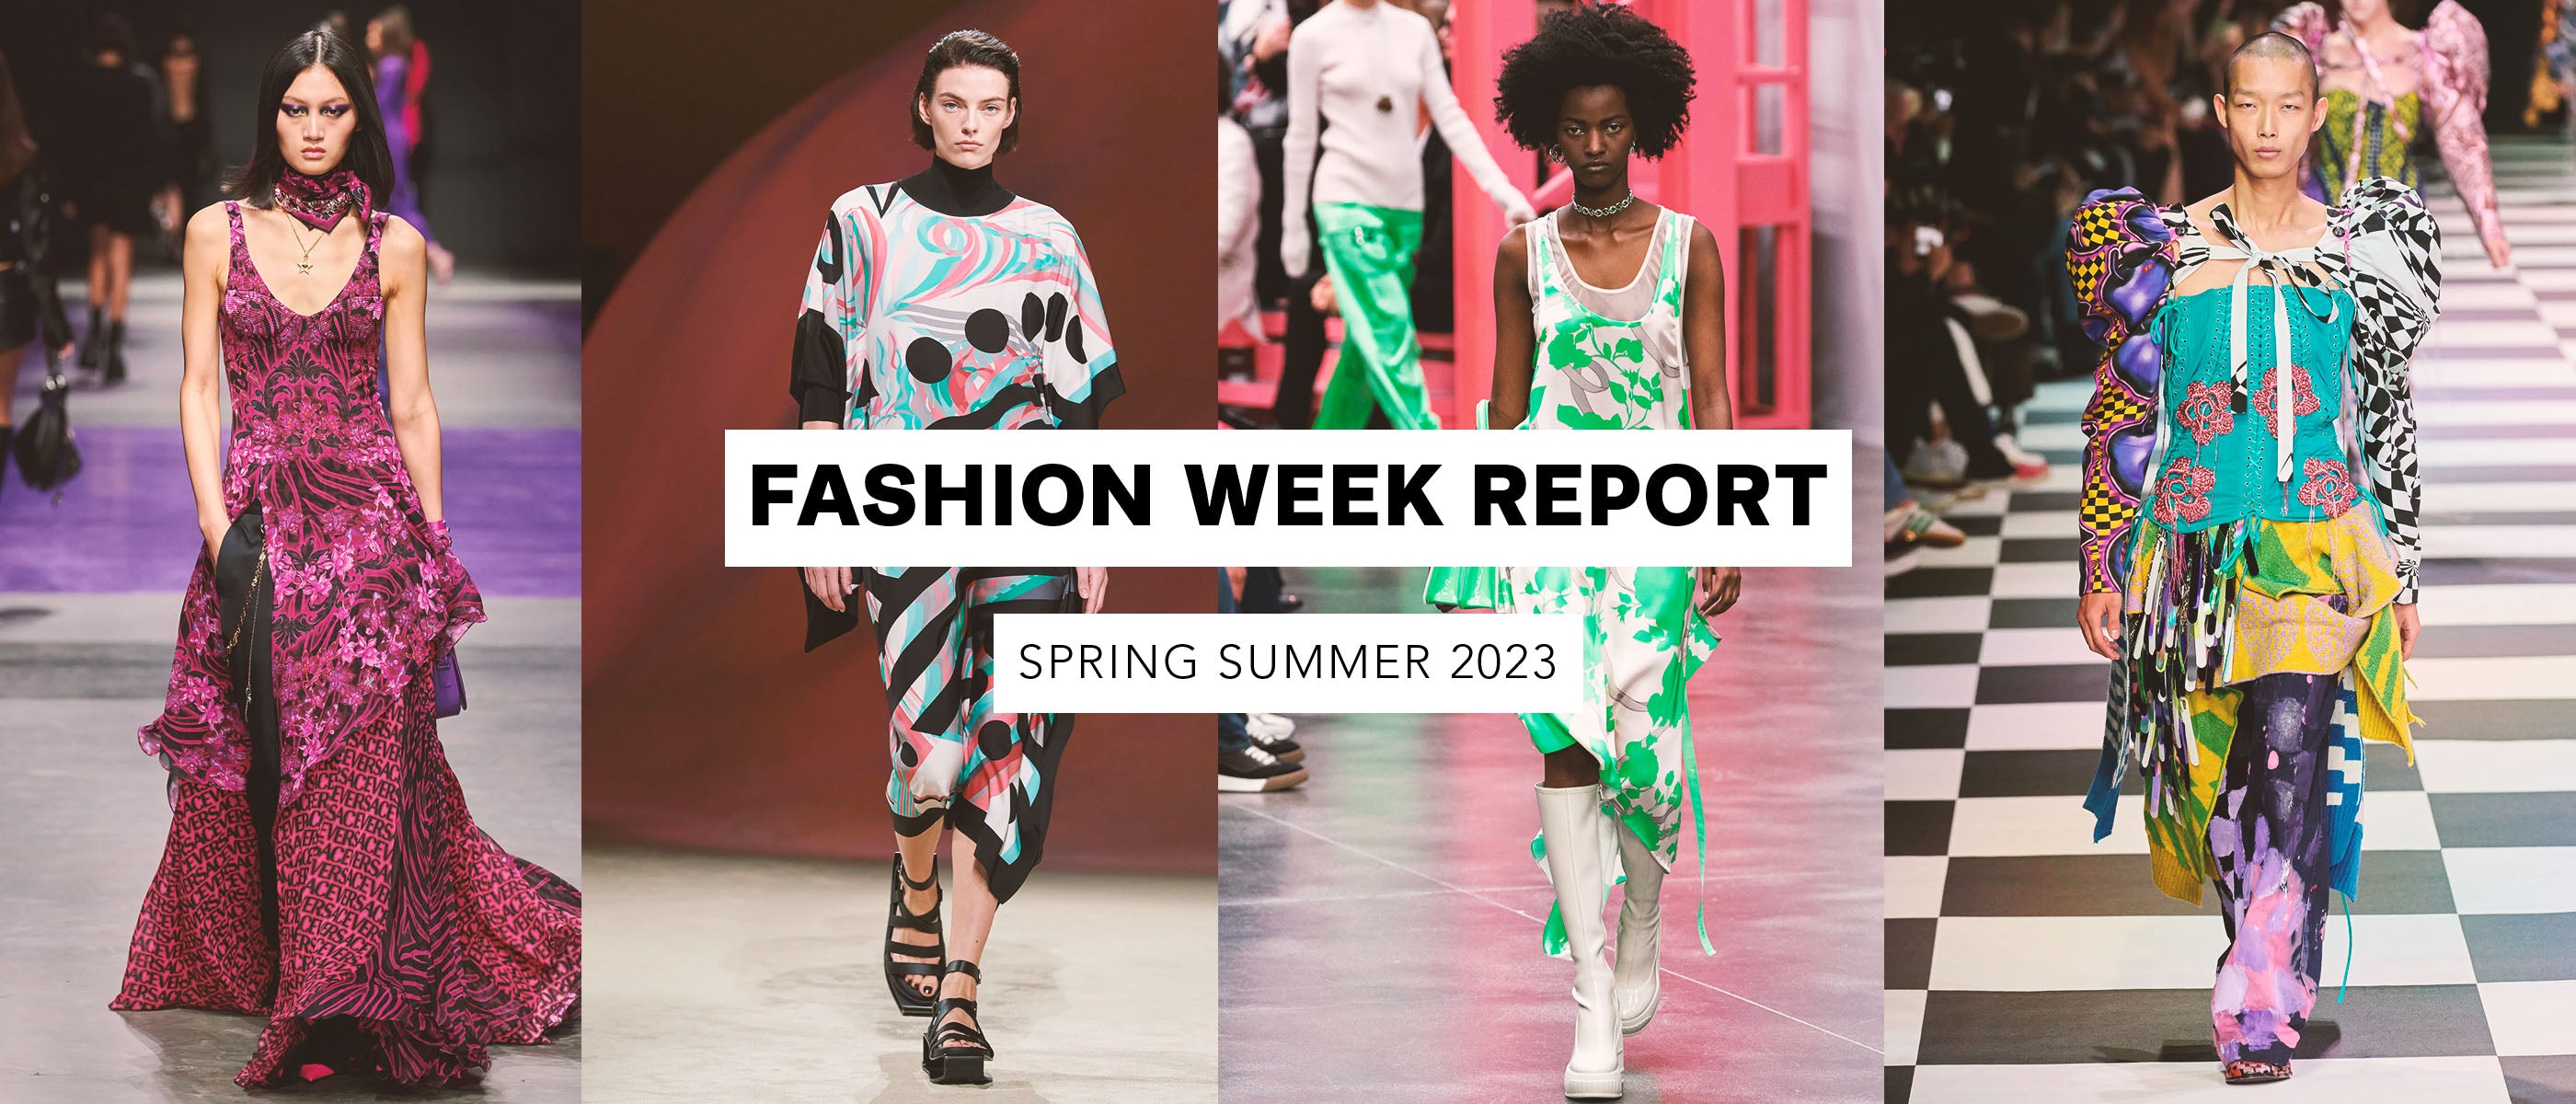 Fashion Week Report - Spring Summer 2023 – Plumager, Inc.